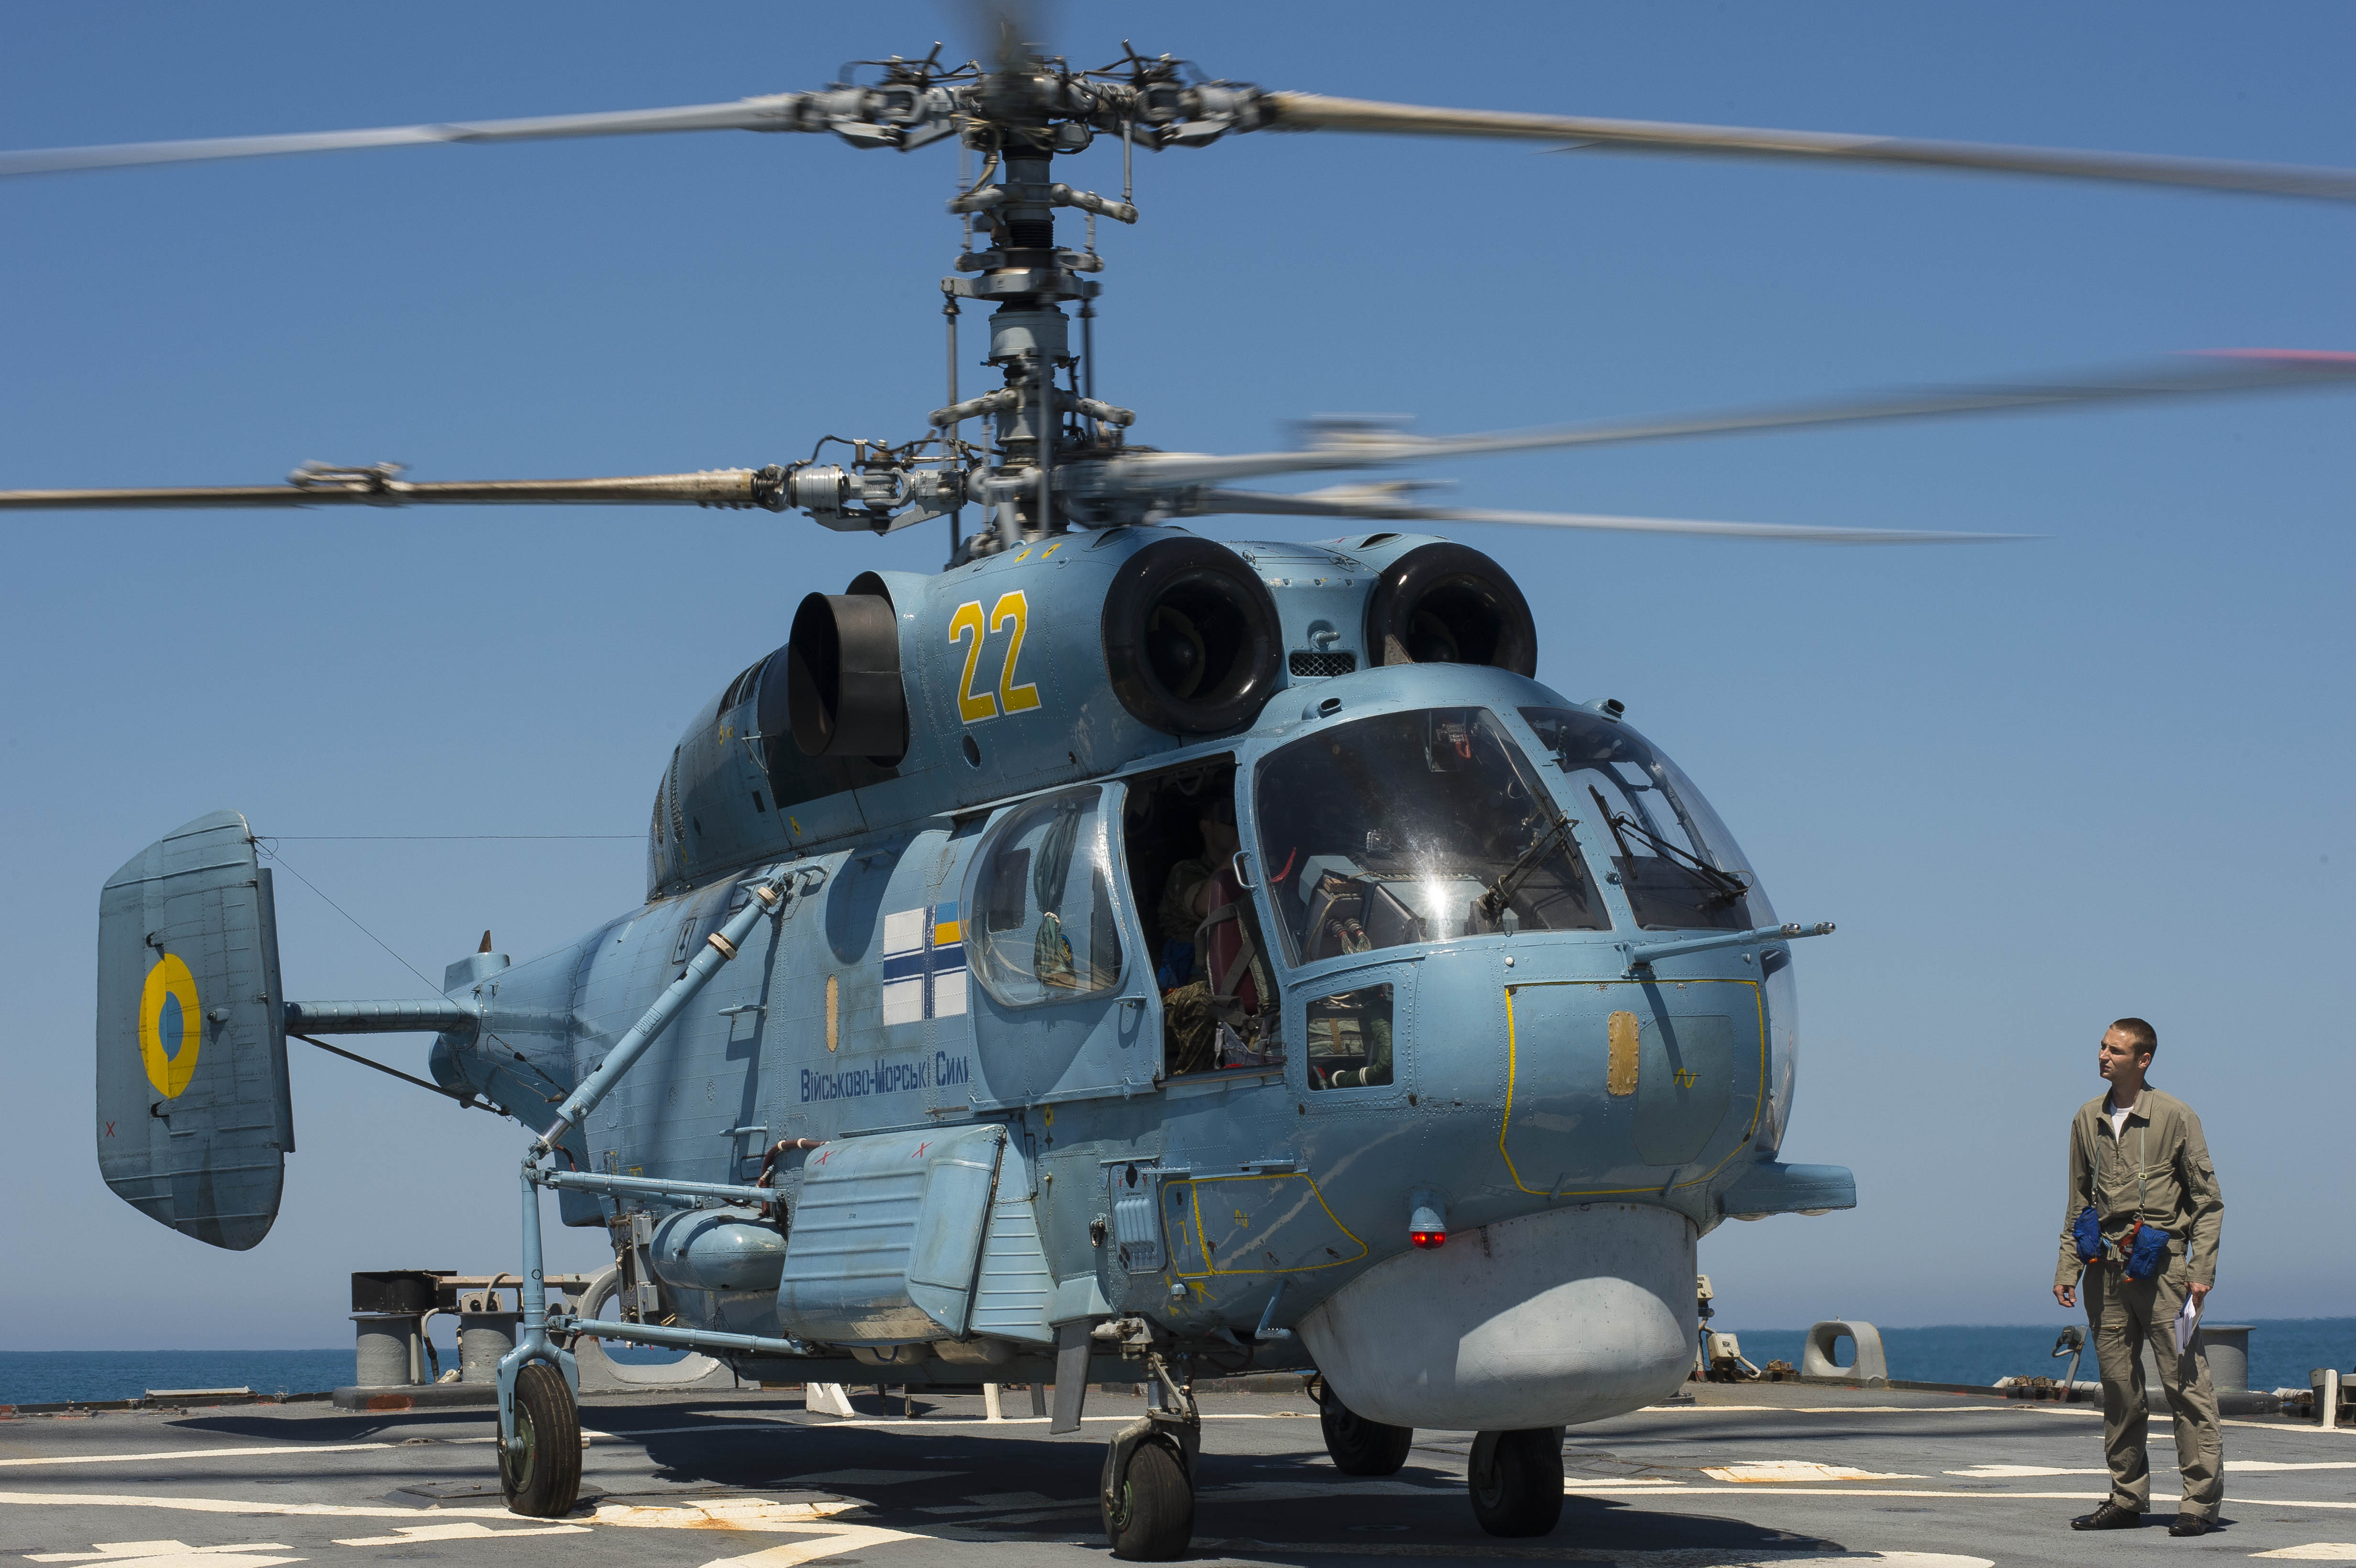 A Ukrainian Navy Helix 05 helicopter conducts flight operations aboard the guided-missile destroyer USS Ross (DDG 71) during a passing exercise on June 2, 2015. US Navy Photo